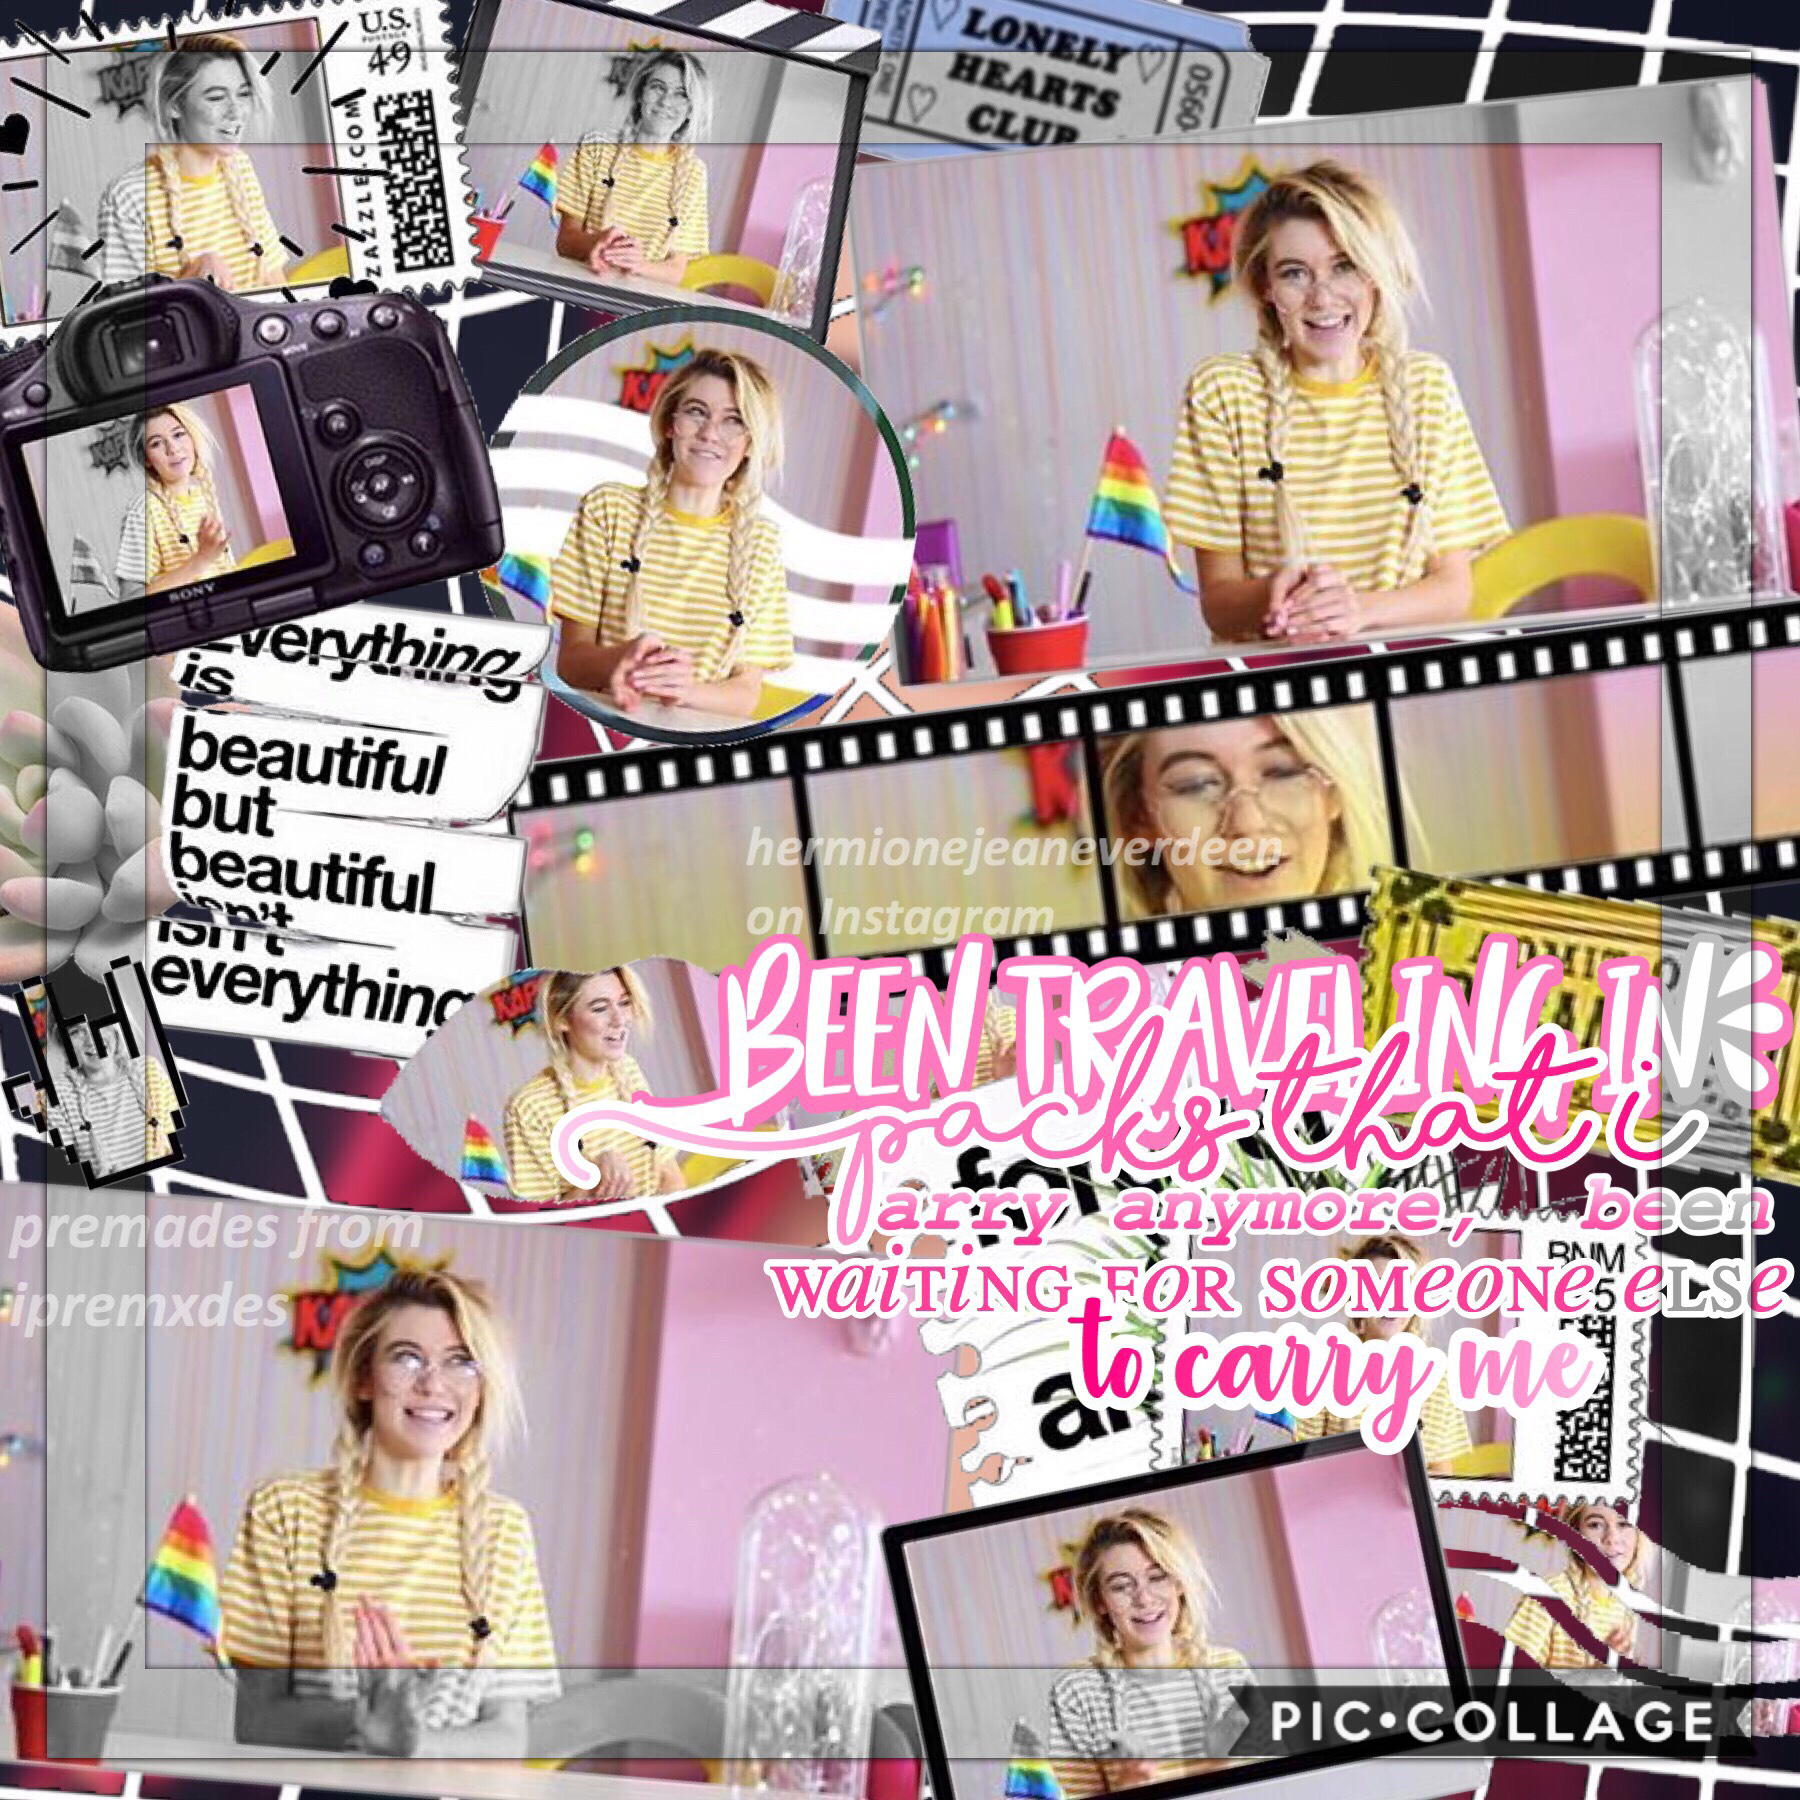 tap
Jessie Paege, the YouTuber in this edit, just came out on her channel and(its a 2 part video) the videos are so amazing, please check them out and show her love! Also, there’s a tutorial on this edit on my YouTube channel!